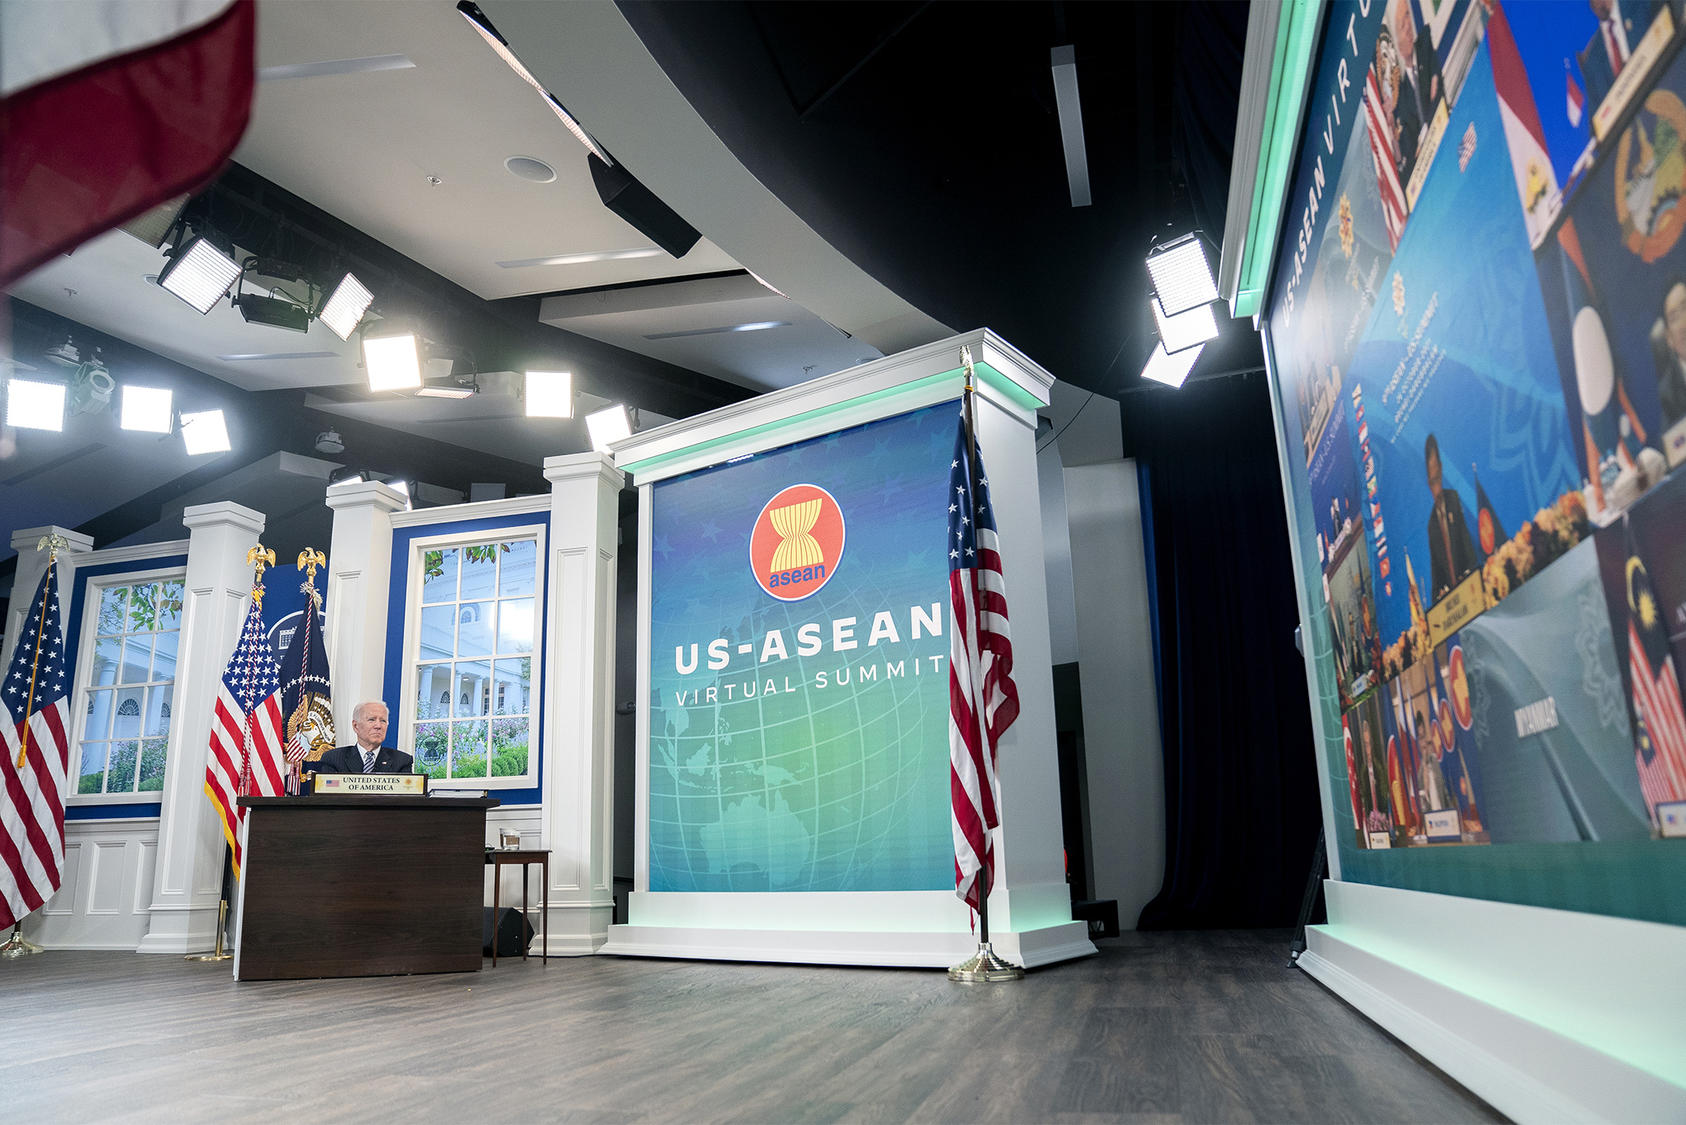 President Biden at a virtual U.S.-ASEAN Summit in 2021. Engagement with the bloc has been hampered by COVID, but this week’s Special Summit demonstrates the U.S. is committed to deepening ties with ASEAN. (Stefani Reynolds/The New York Times)